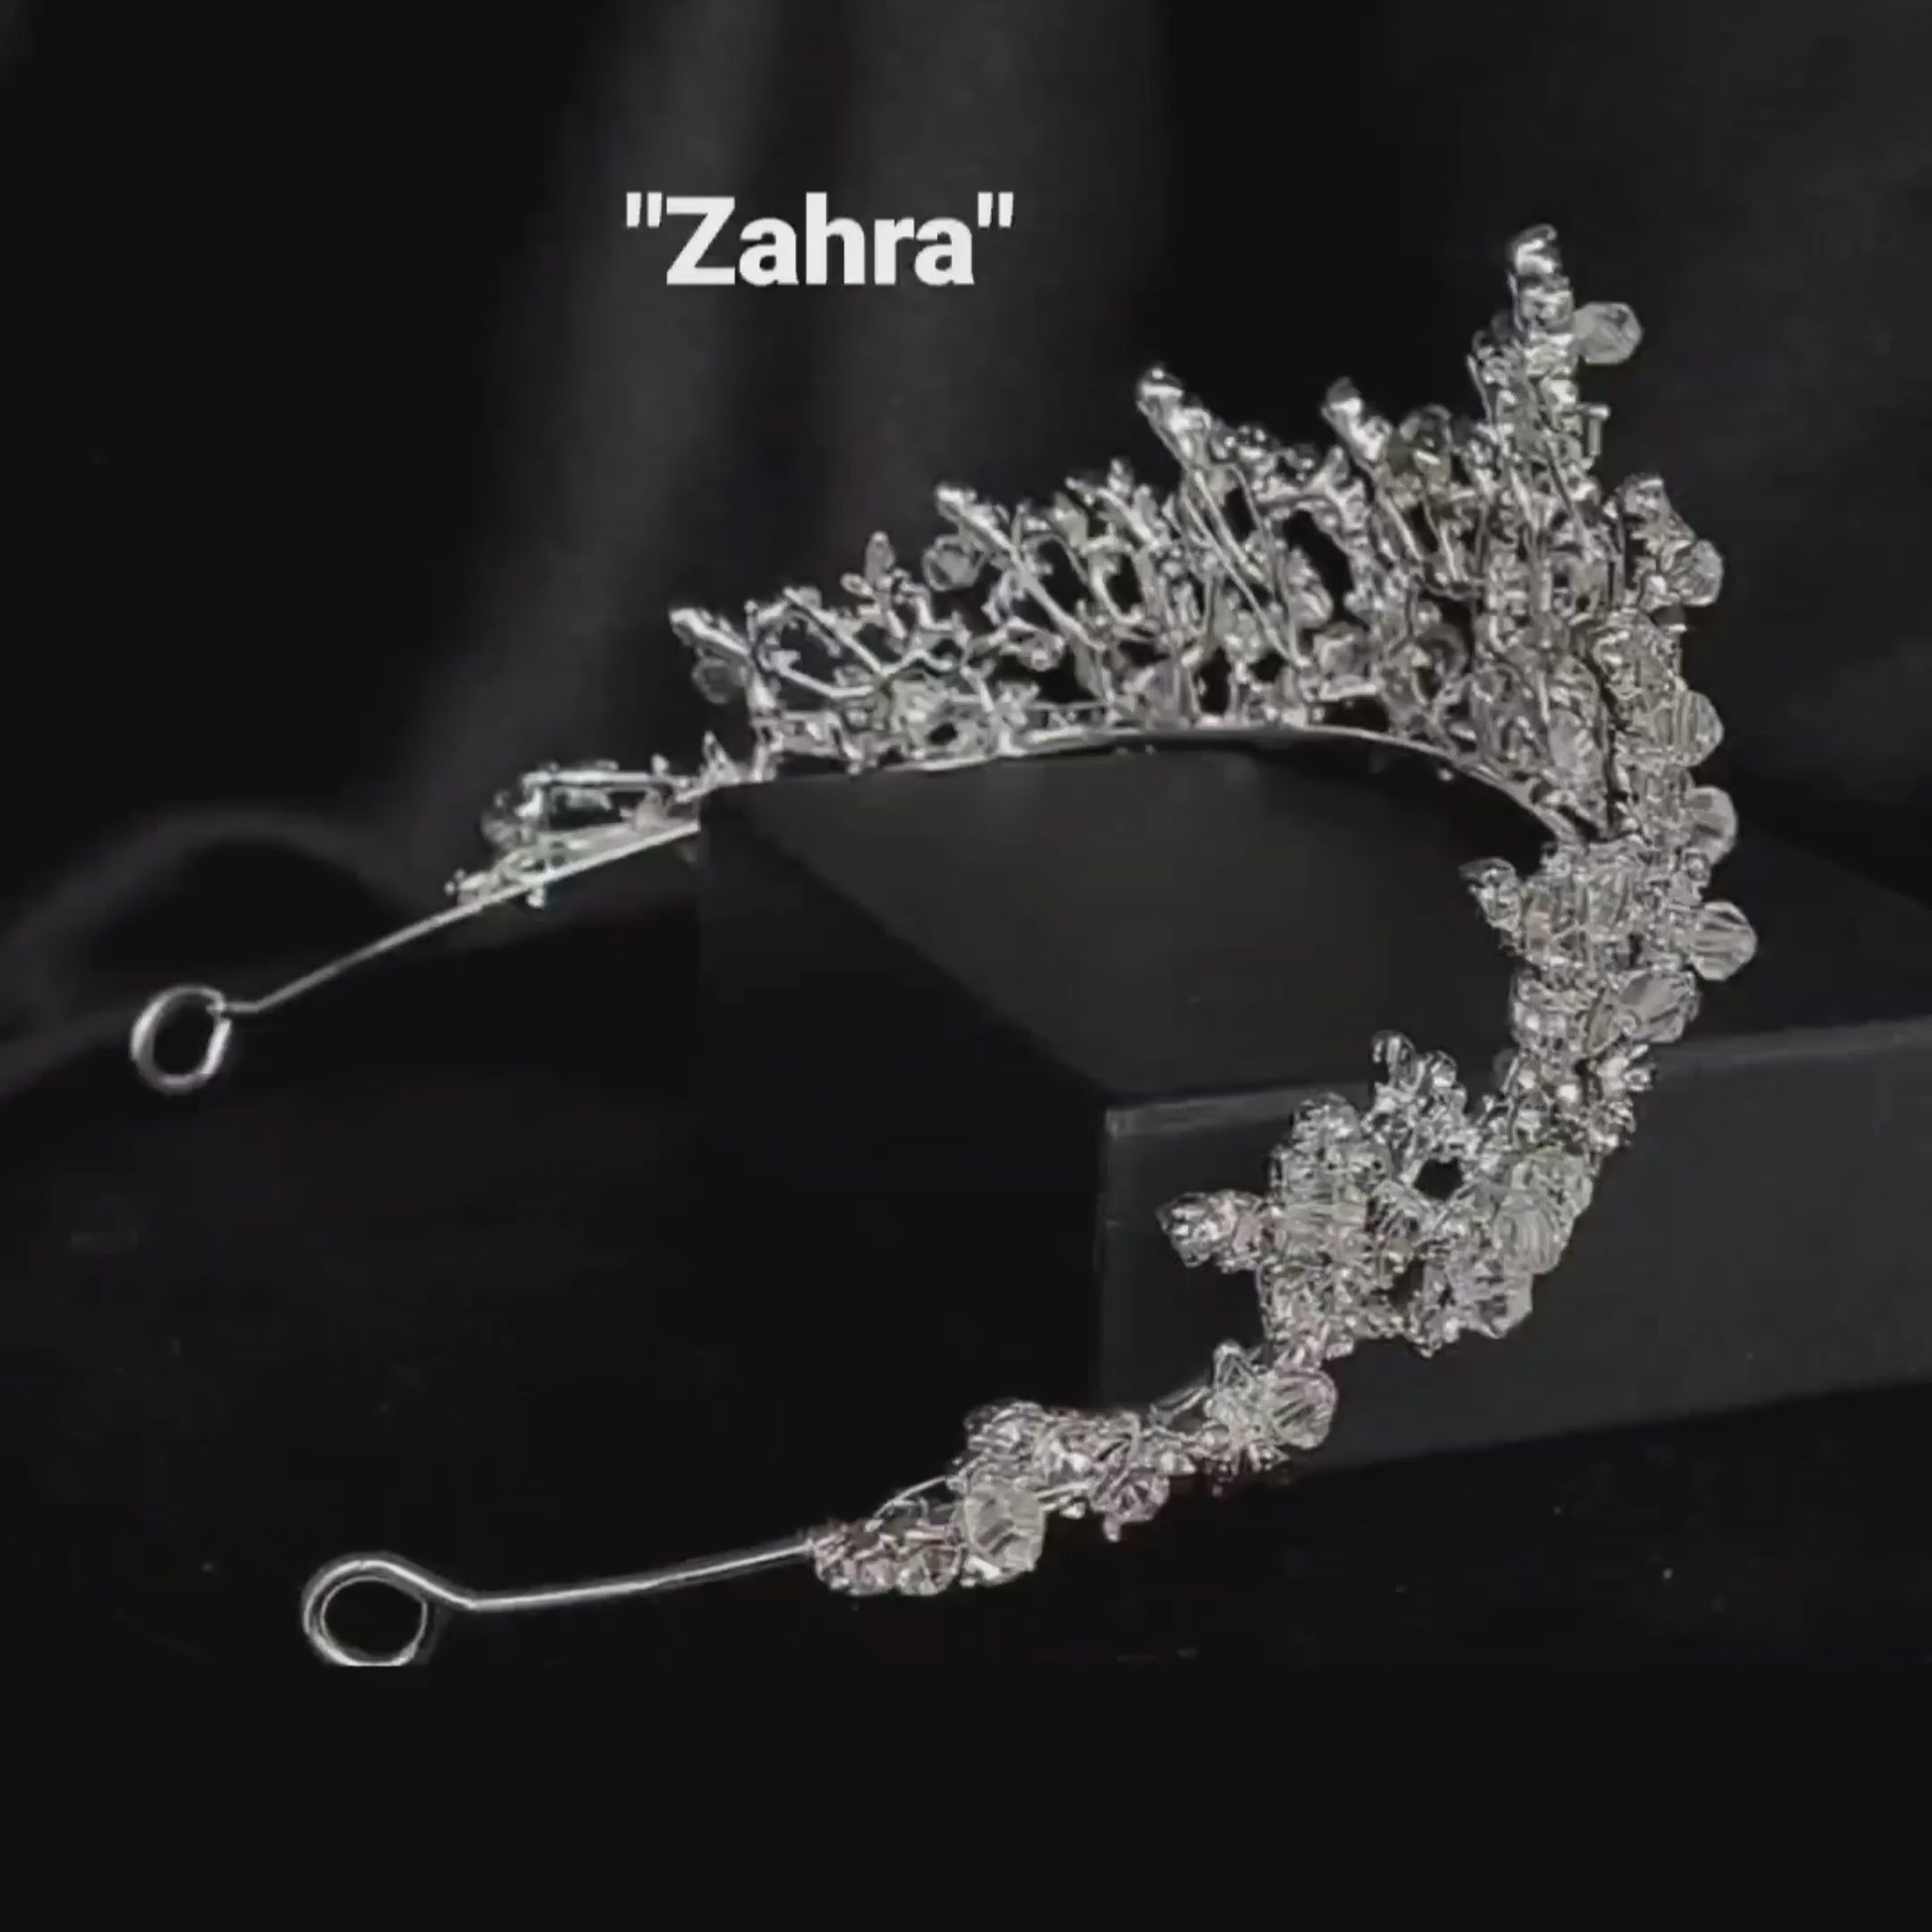 A silver tiara with rhinestones sitting on top of a black box. The tiara is made up of multiple curved bands, each of which is decorated with rhinestones. The tiara is sitting on top of a black box, which is partially obscuring the bottom of the tiara.